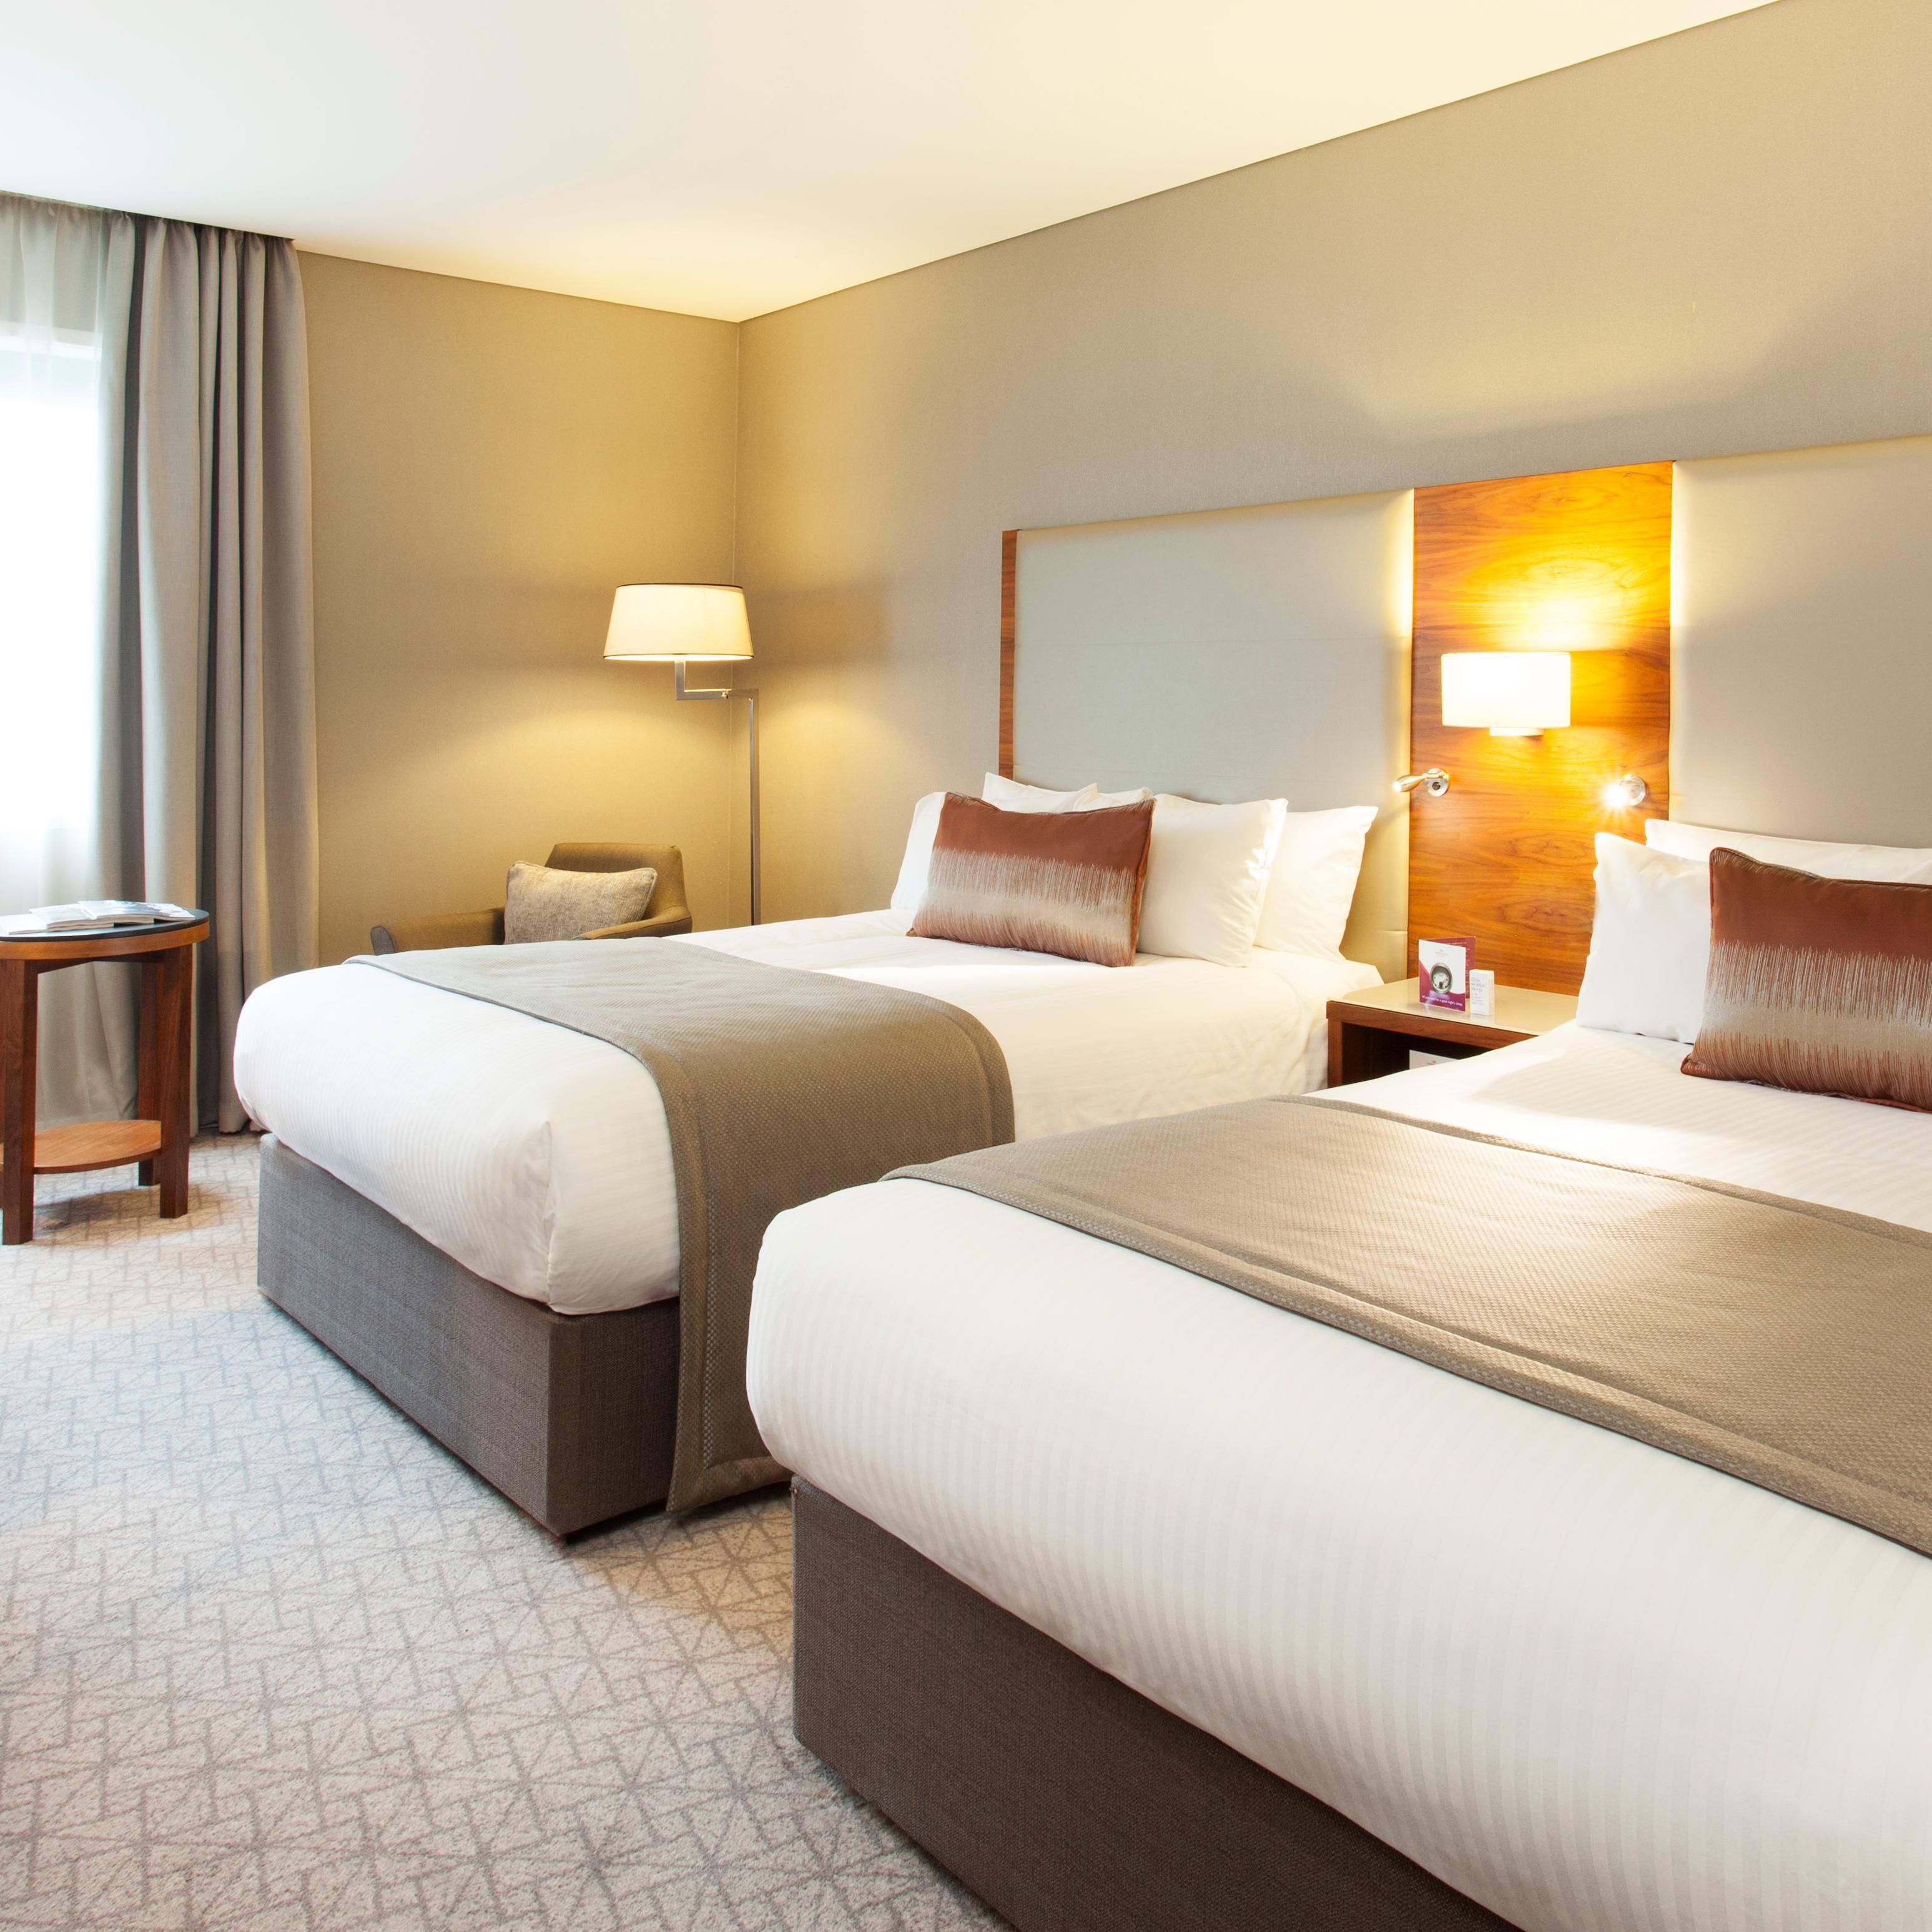 Newly rrefurbished  twin guest rooms have two double beds